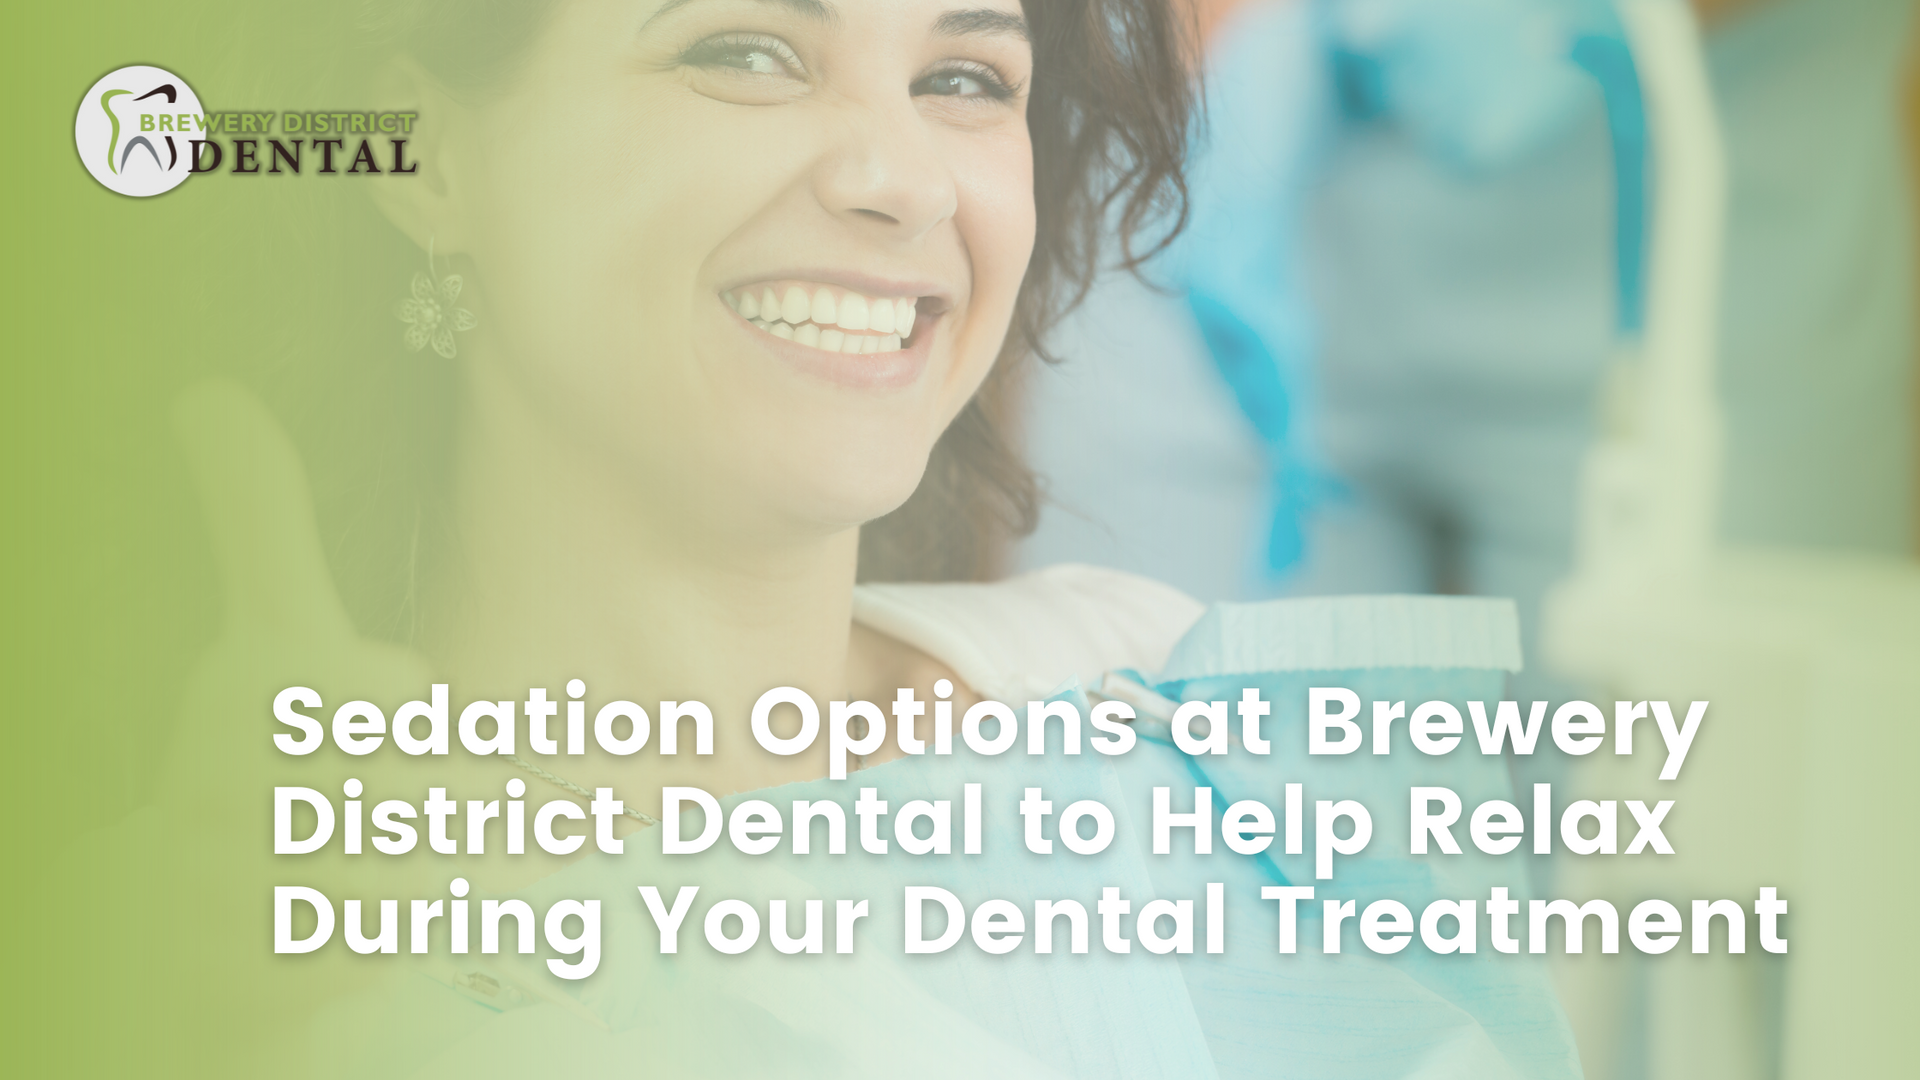 woman smiling at dentist office with brewery district dental logo